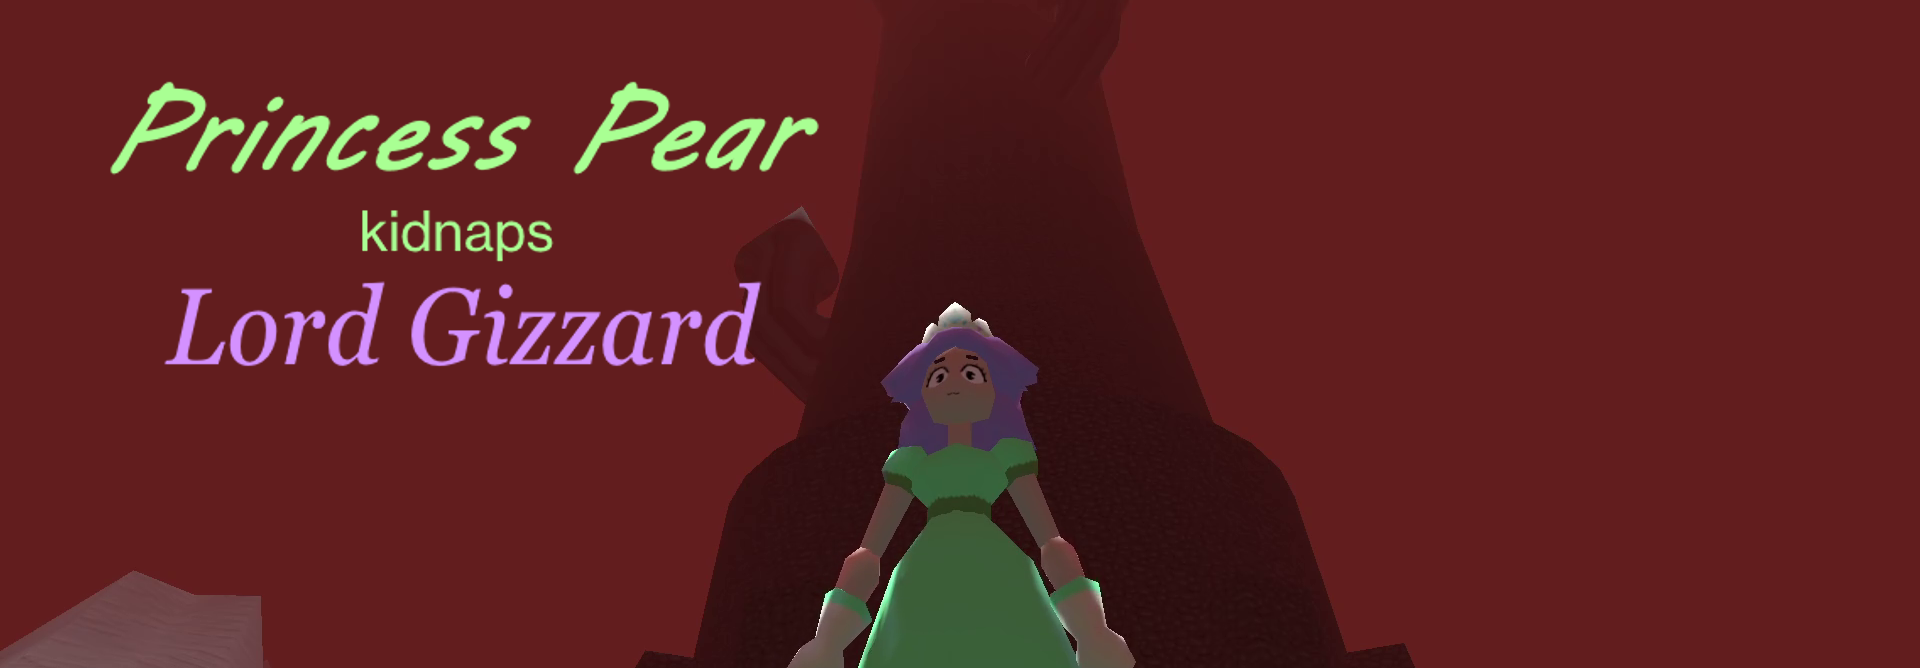 Princess Pear Kidnaps Lord Gizzard: Blatantly Unfinished Edition